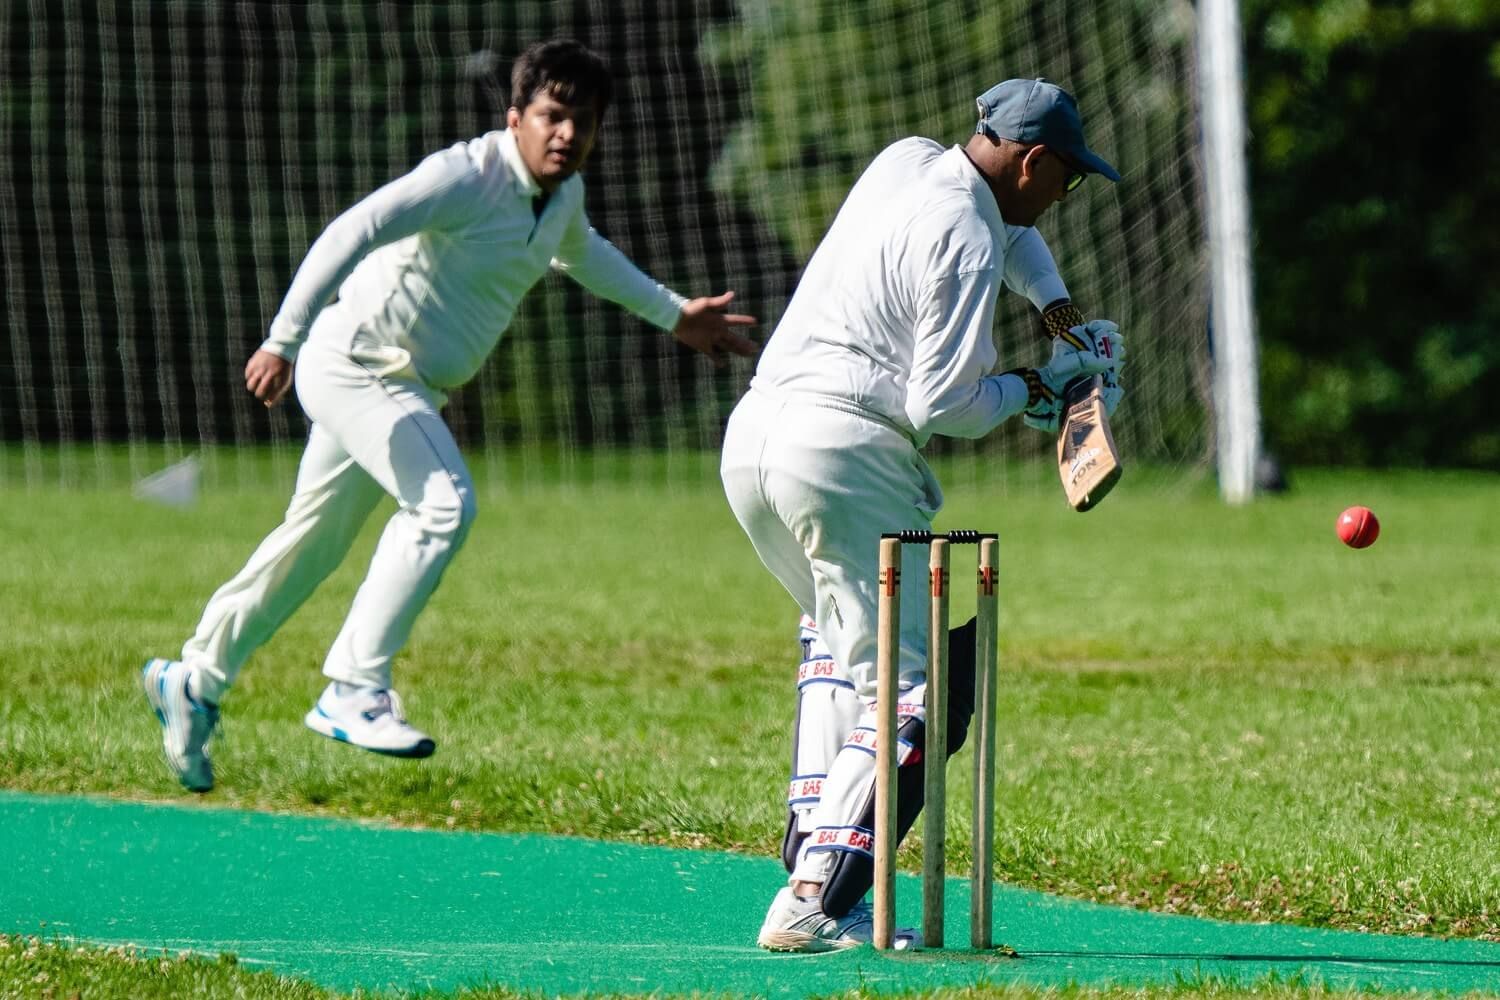 Two people playing cricket